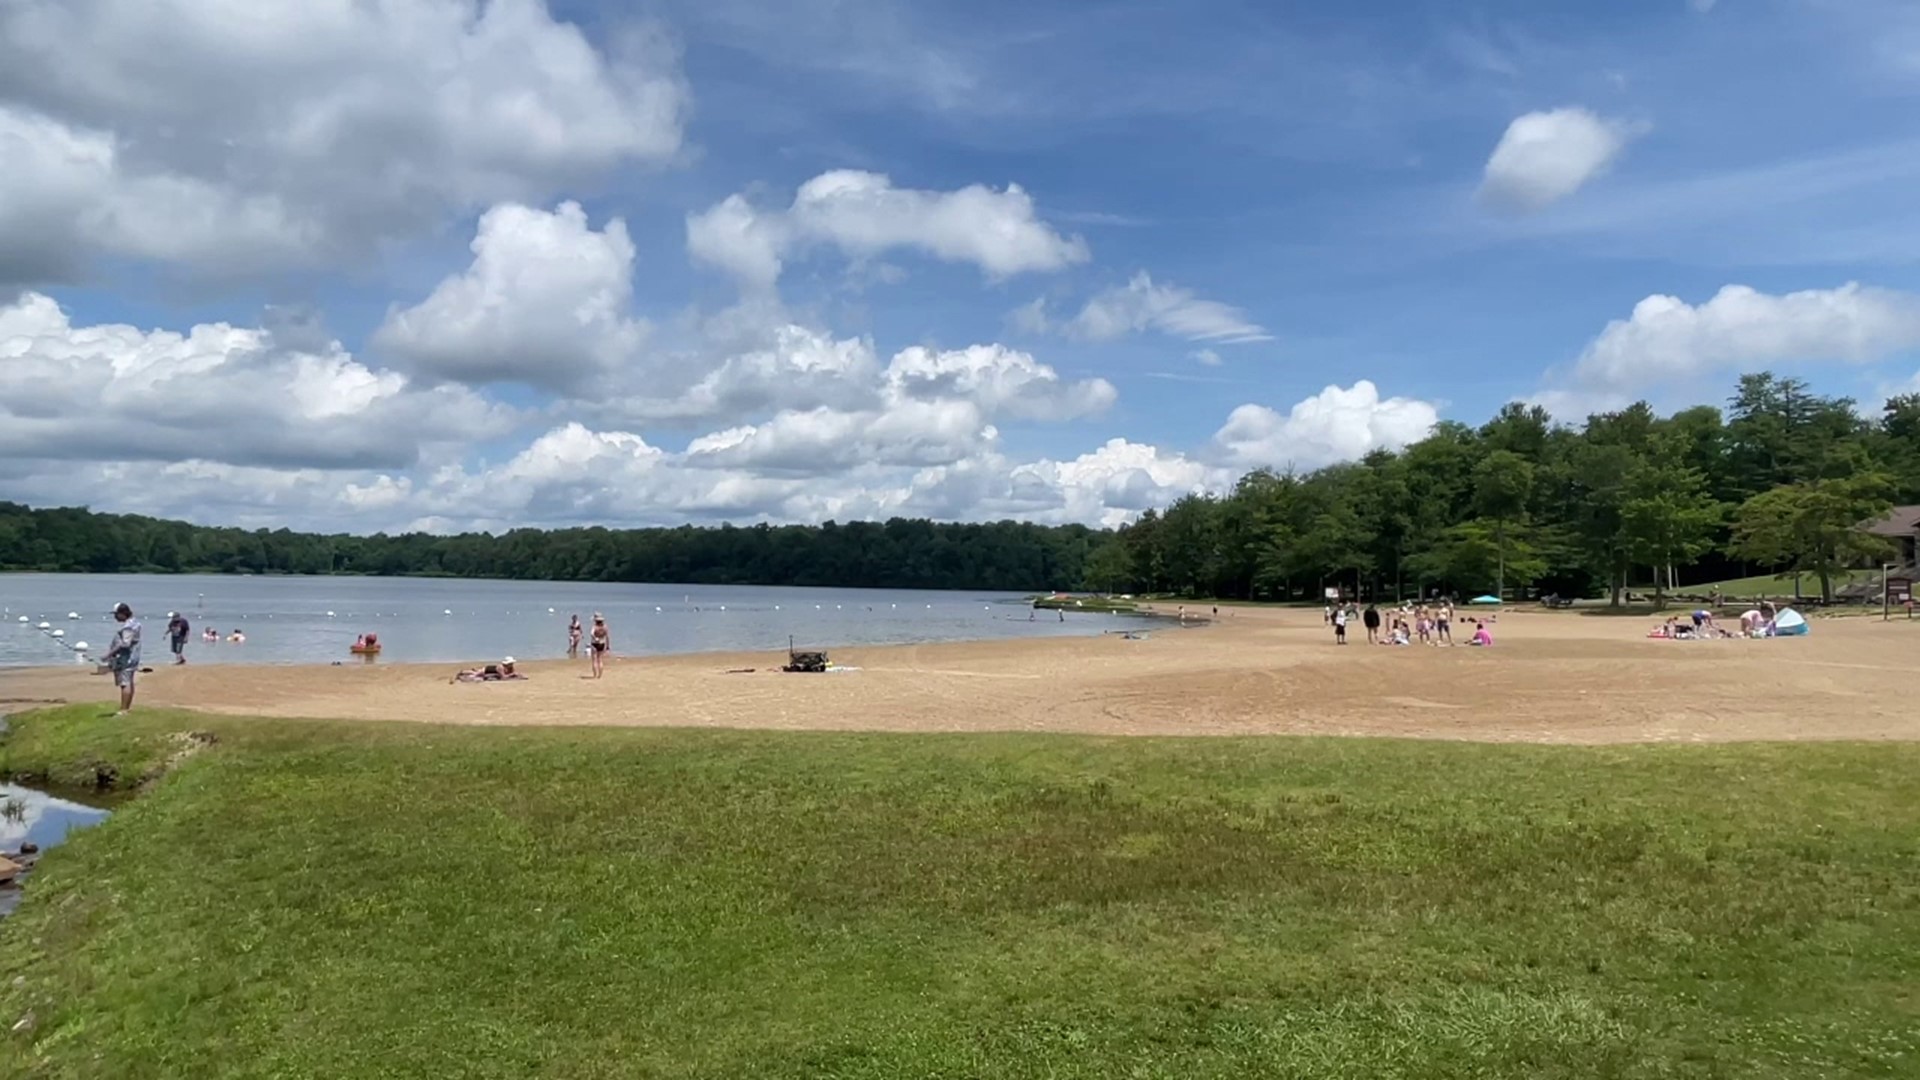 Newswatch 16's Chelsea Strub found campers enjoying the seclusion at the state park in Sullivan County.